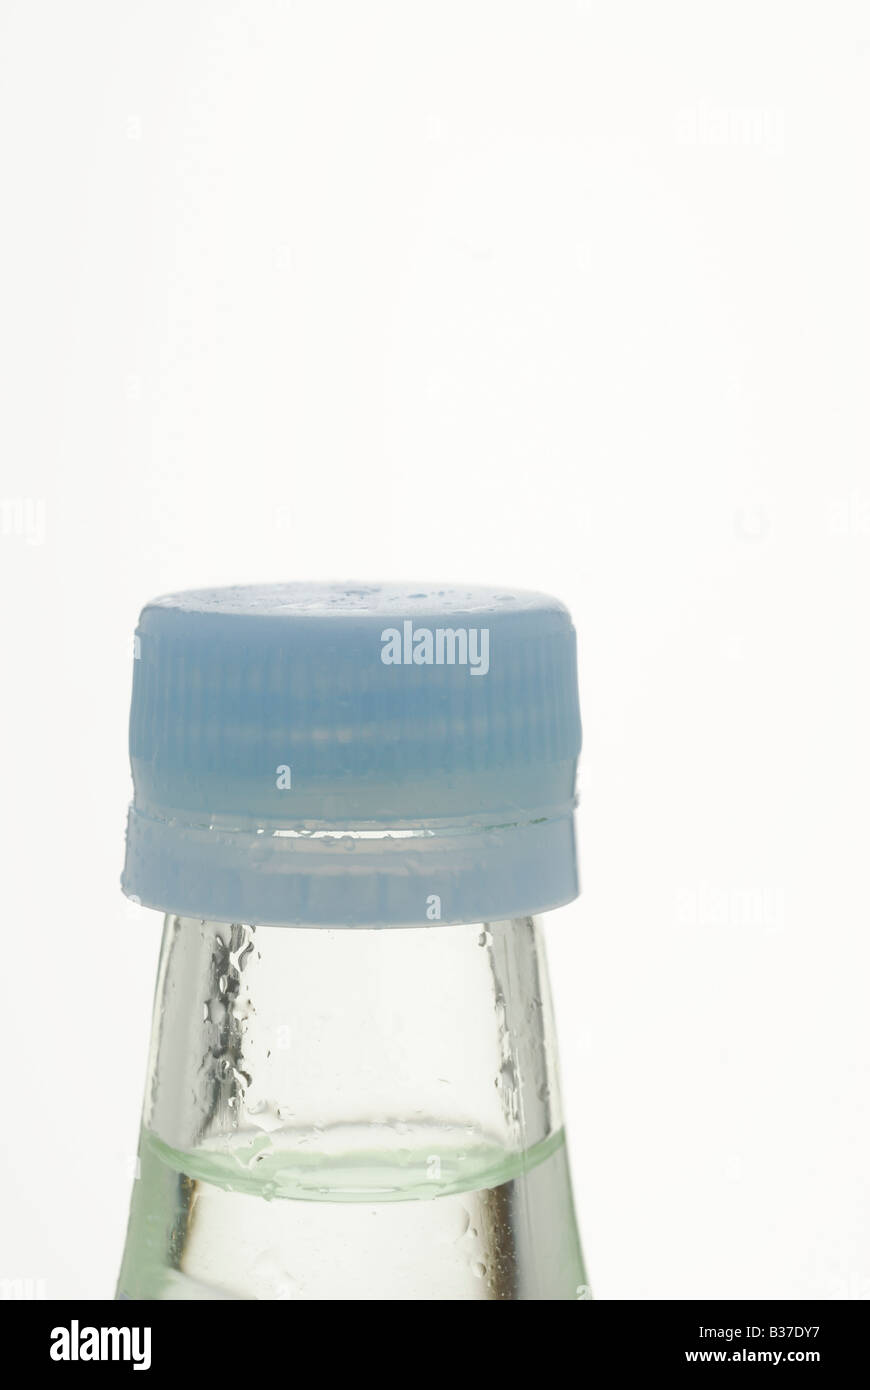 https://c8.alamy.com/comp/B37DY7/security-sealed-plastic-lid-on-water-bottle-B37DY7.jpg